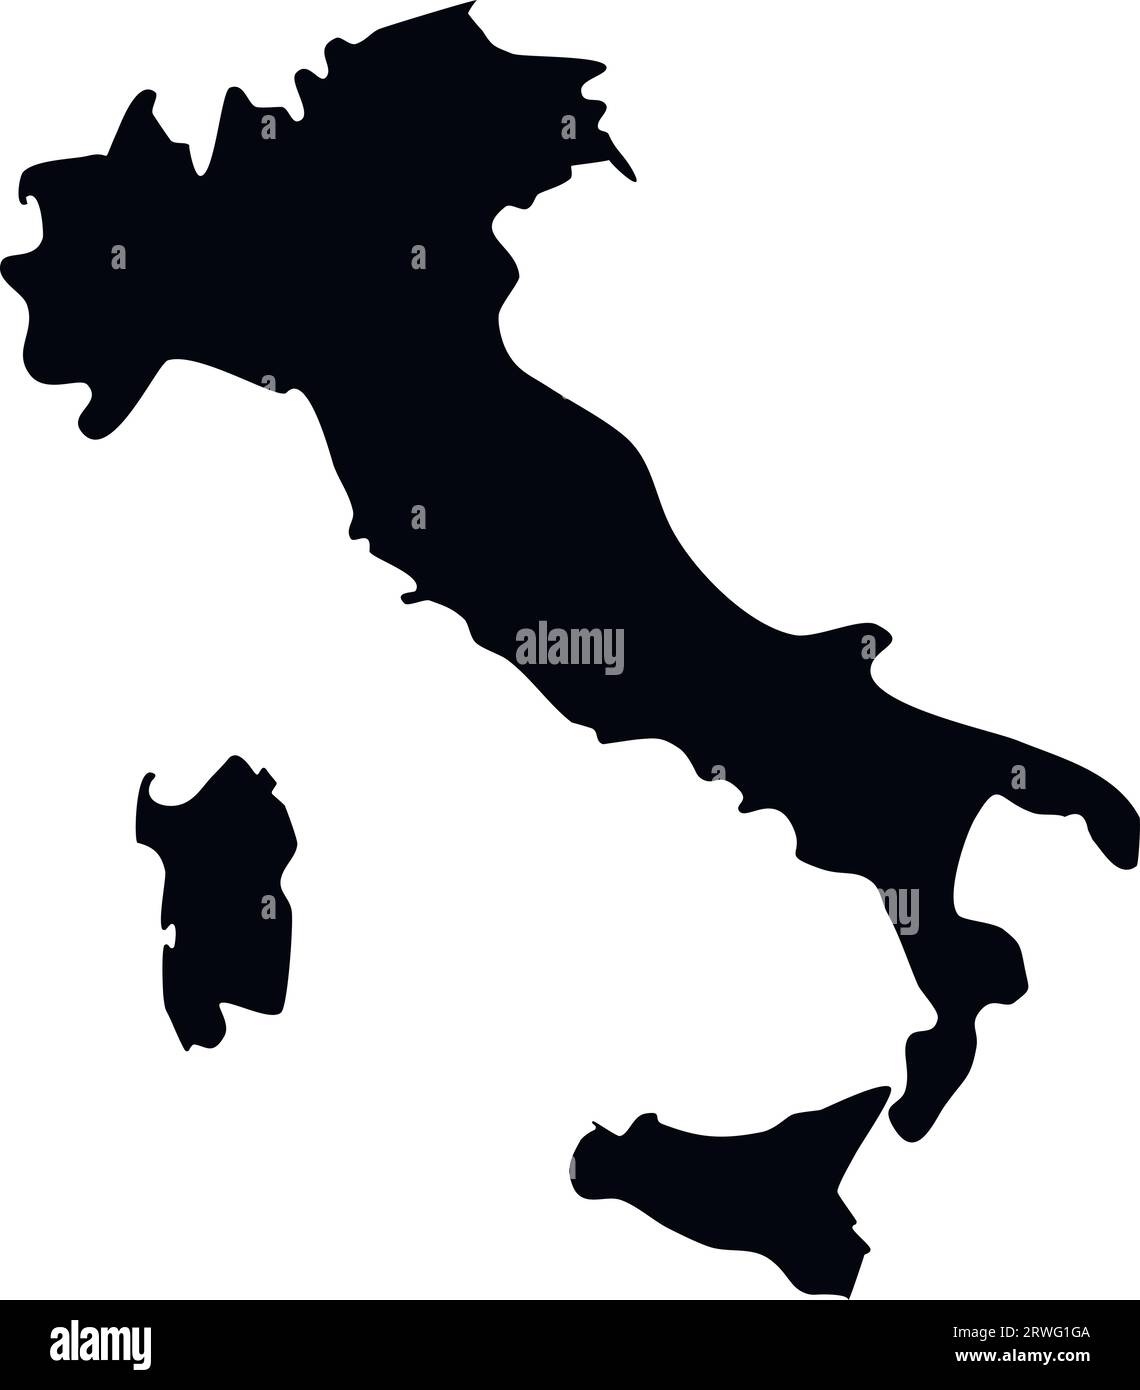 isolated simplified illustration icon with black silhouette of Italy map. White background Stock Vector